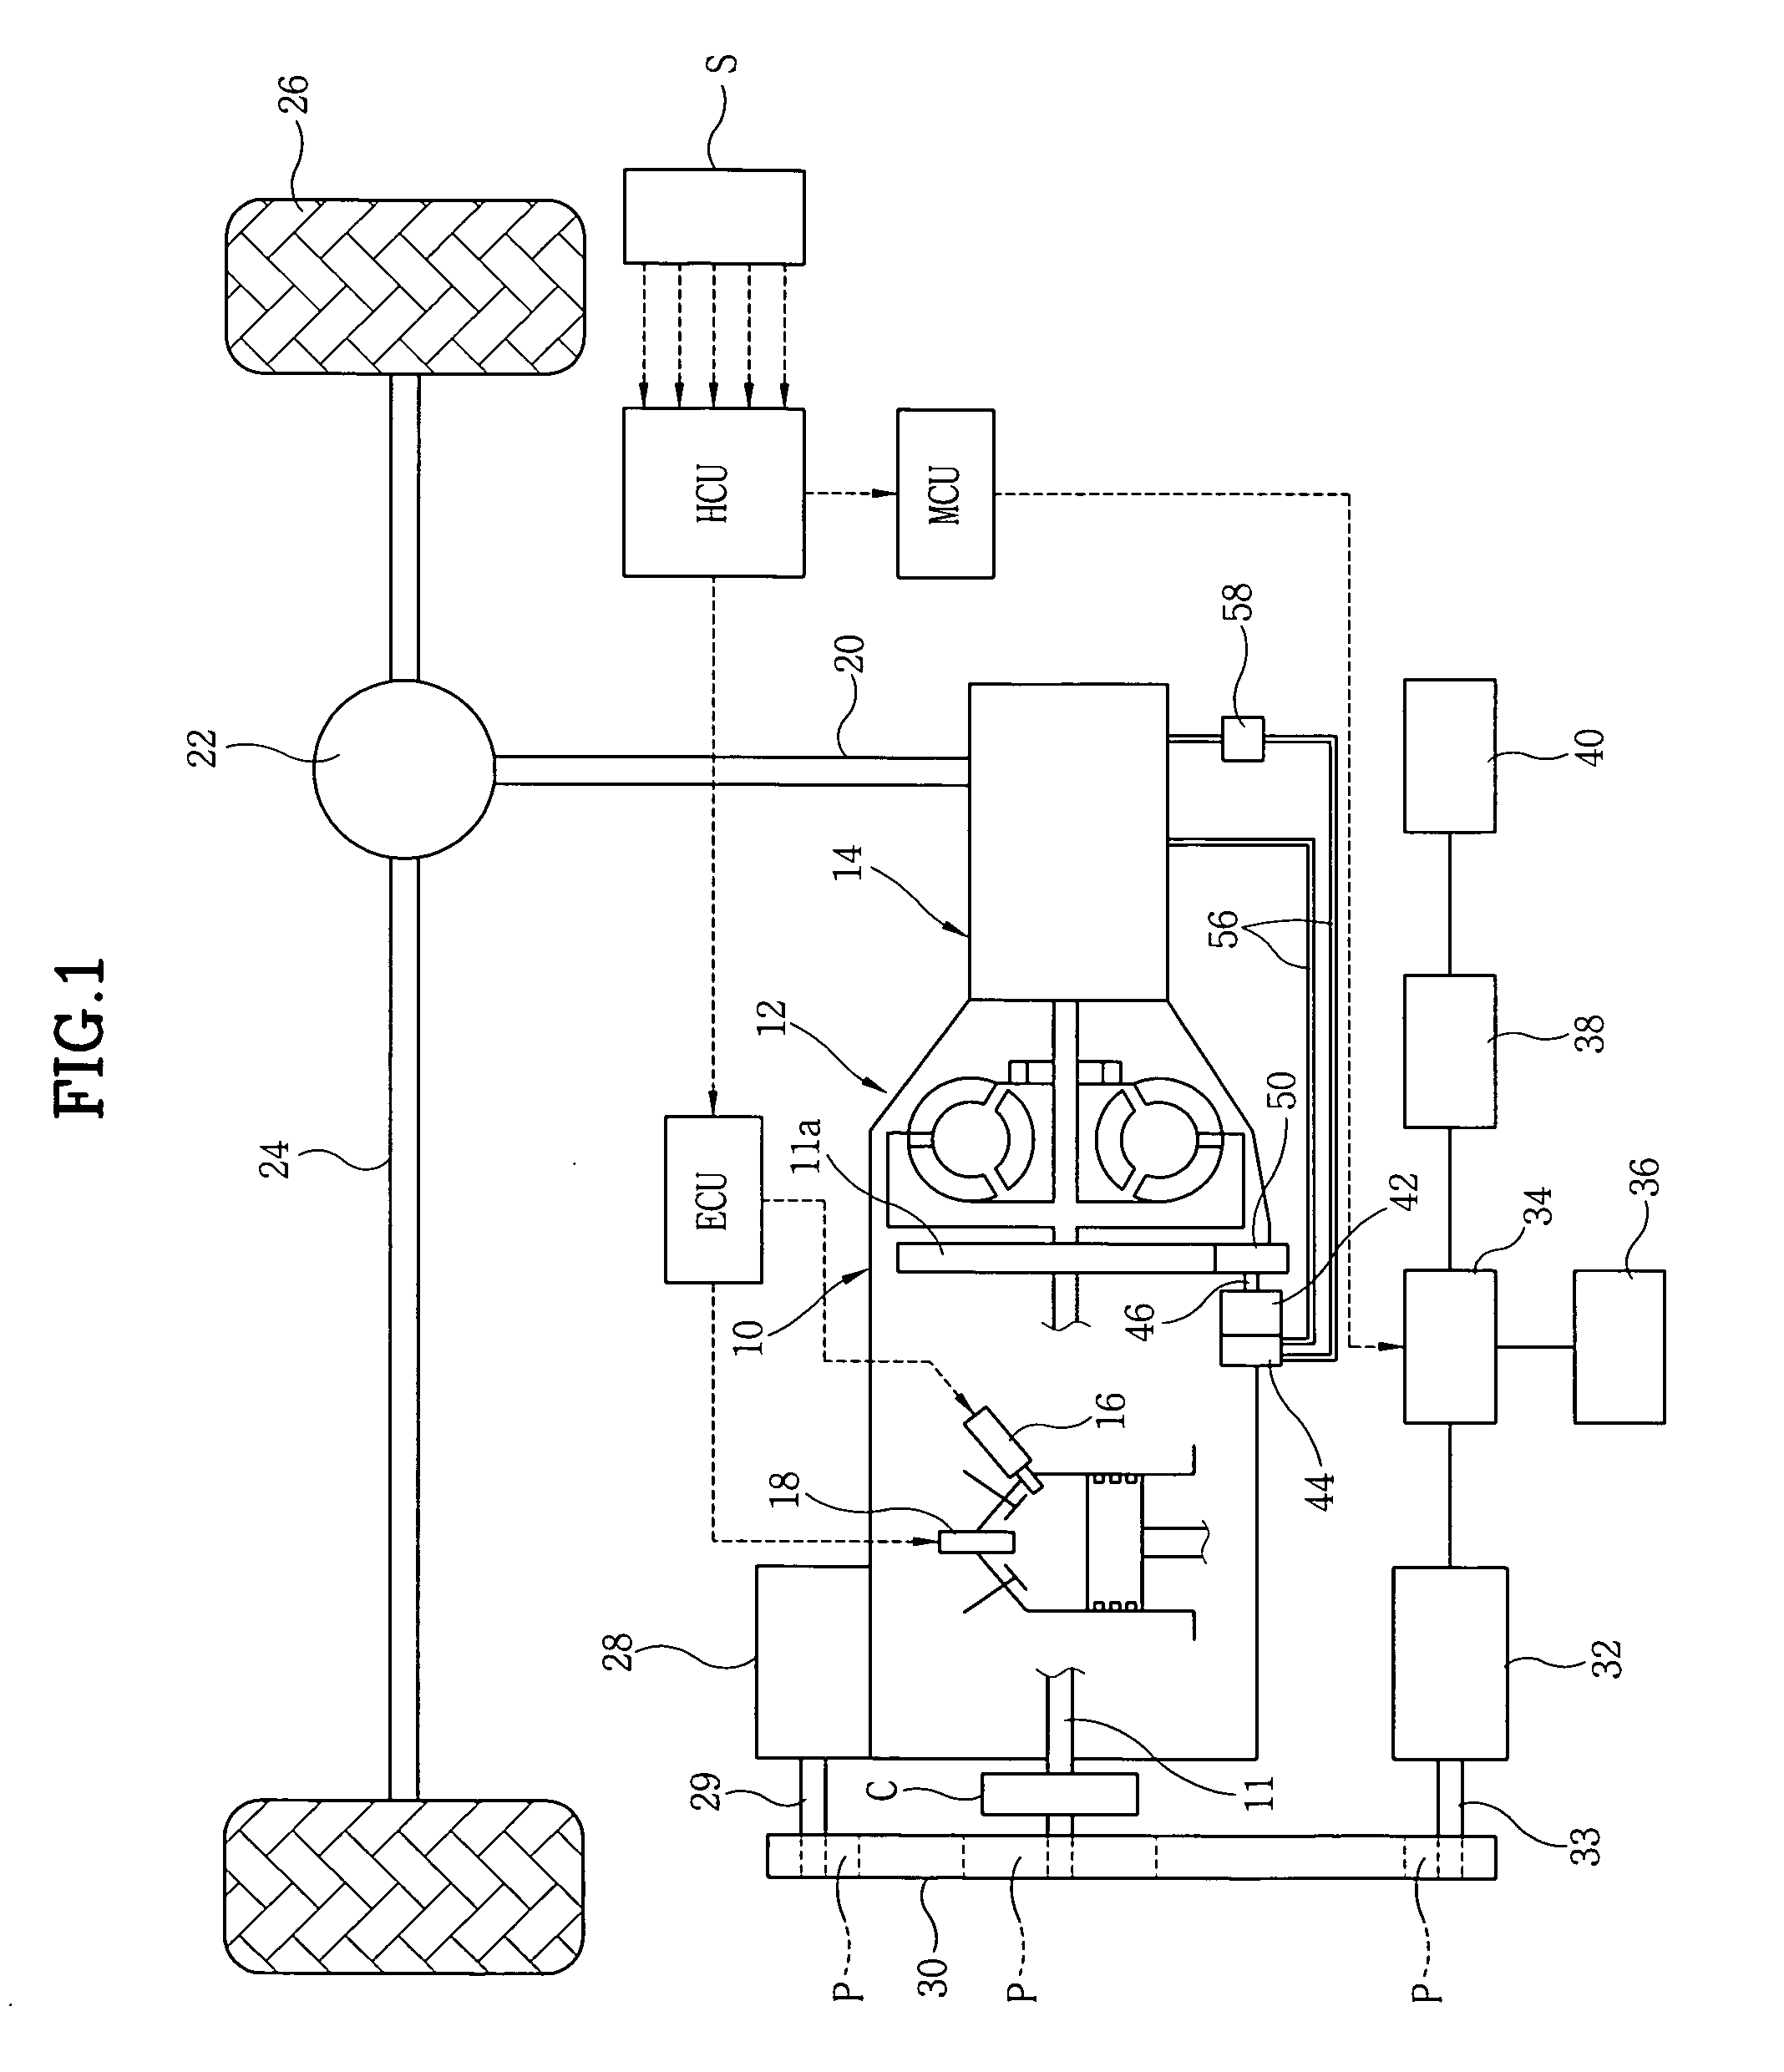 Starter with electric oil pump for hybrid vehicle